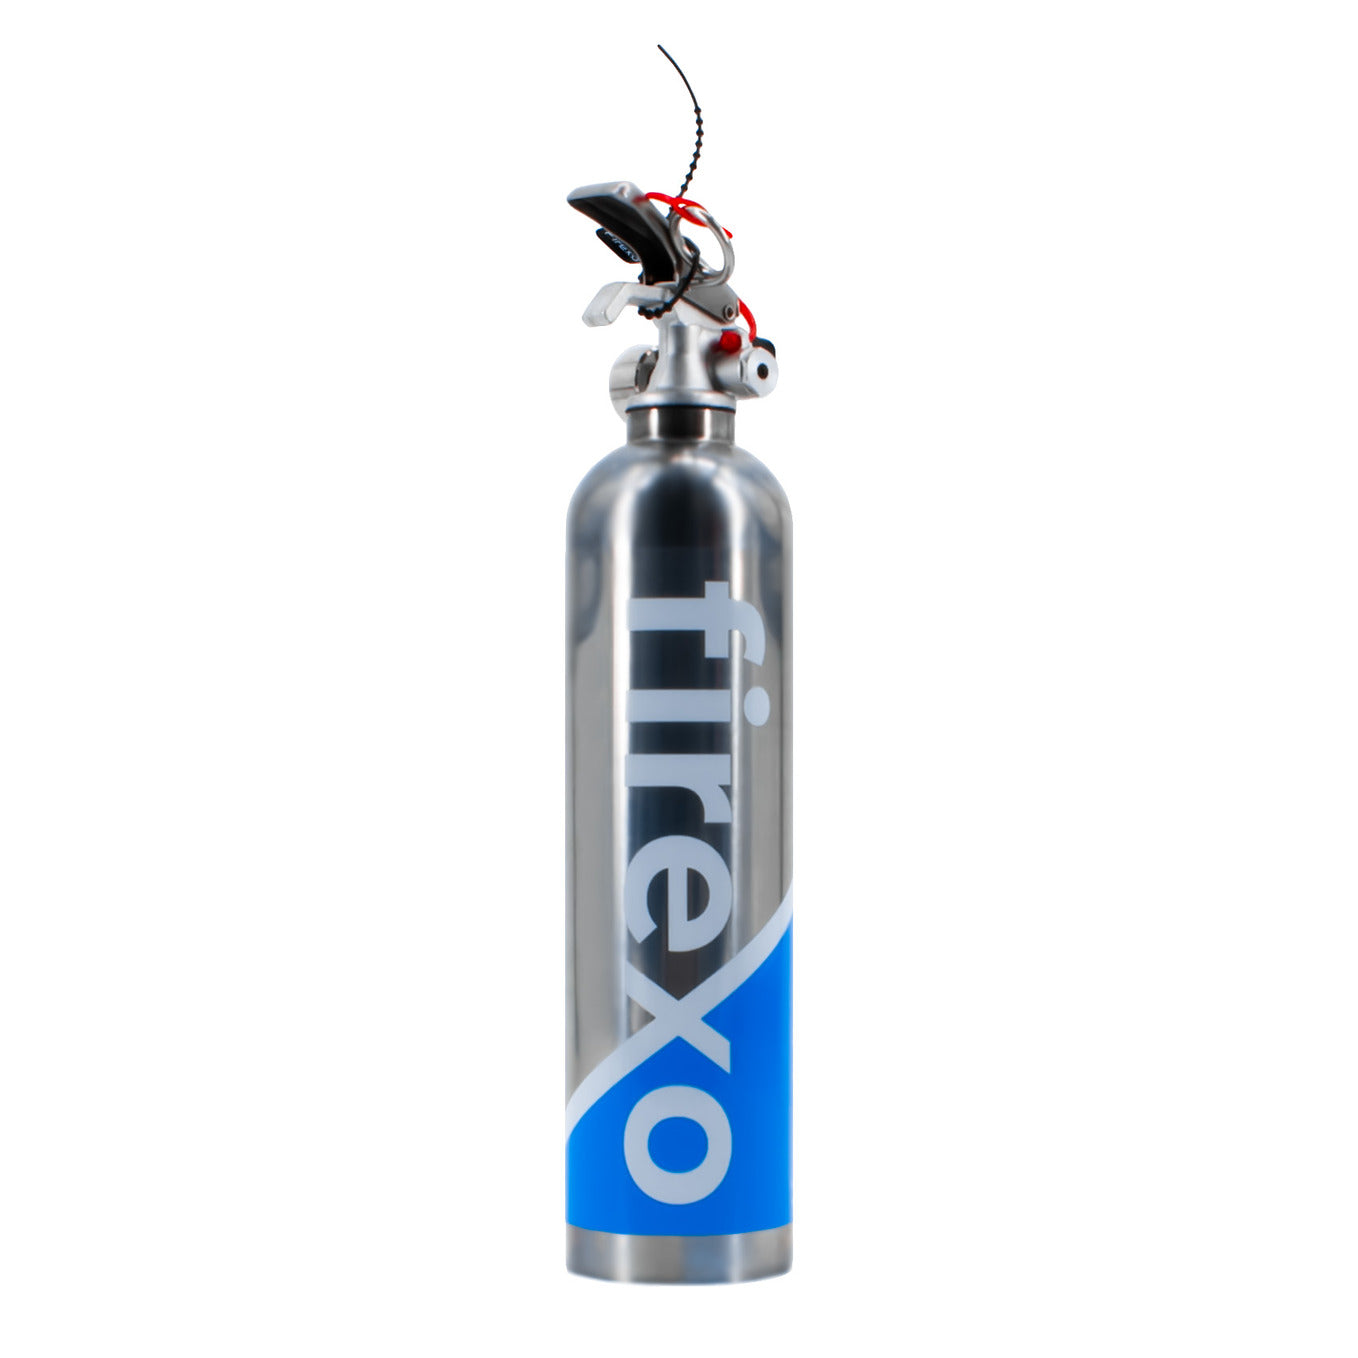 Firexo Small Fire Extinguisher Safety Pack - 2 Item Pack